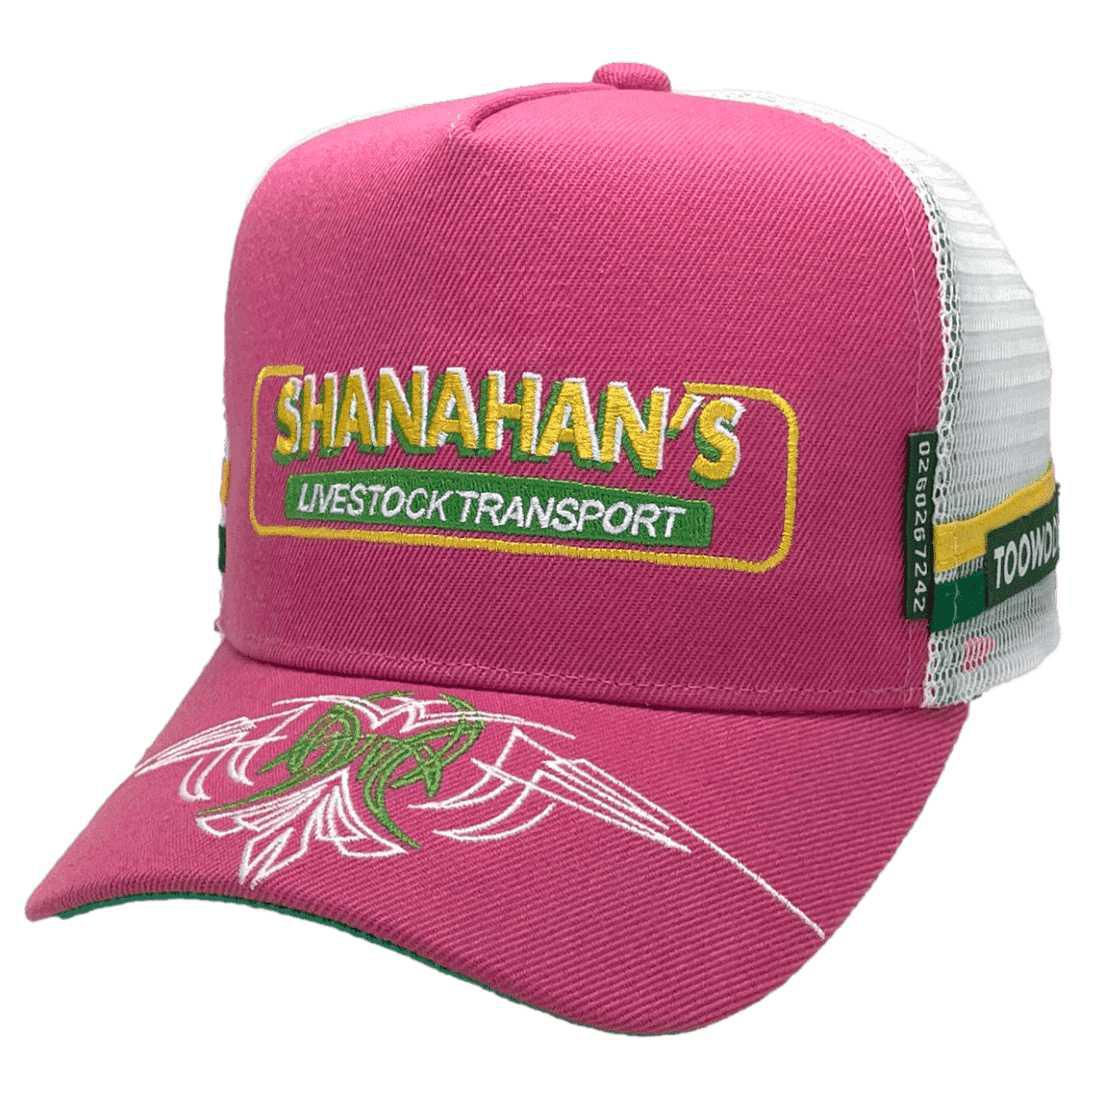 Shanahans Livestock Transport Wodonga VIC and Toowoomba QLD HP Original Power Trucker Aussie Hat with Double Side Bands